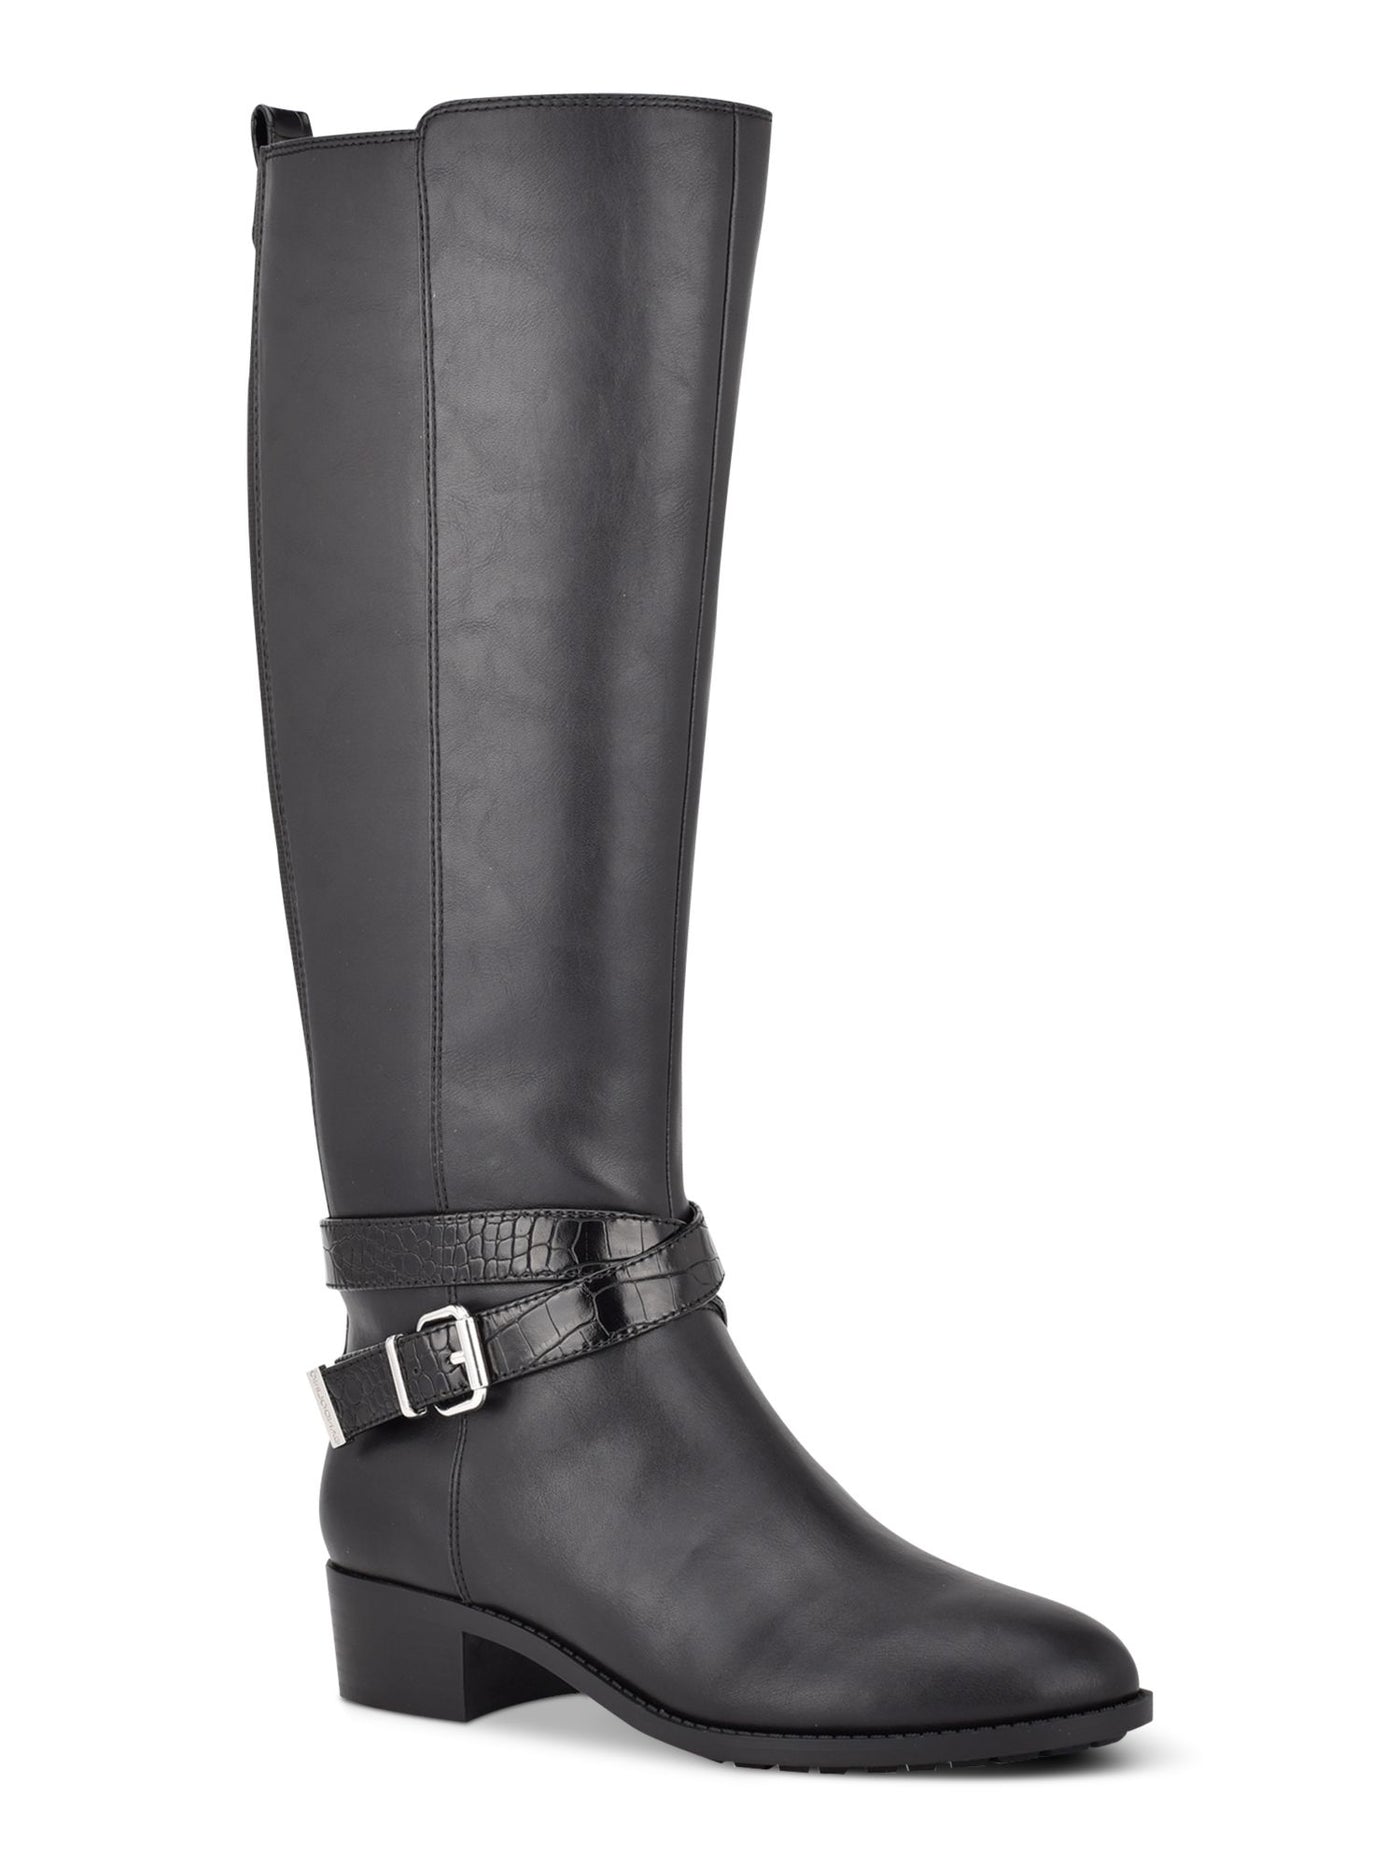 BANDOLINO Womens Gray Full-Length Gore At Back With Croc-Embossed Trim Back Heel Tab Buckle Accent Non-Slip Noles Almond Toe Block Heel Zip-Up Riding Boot 6 M